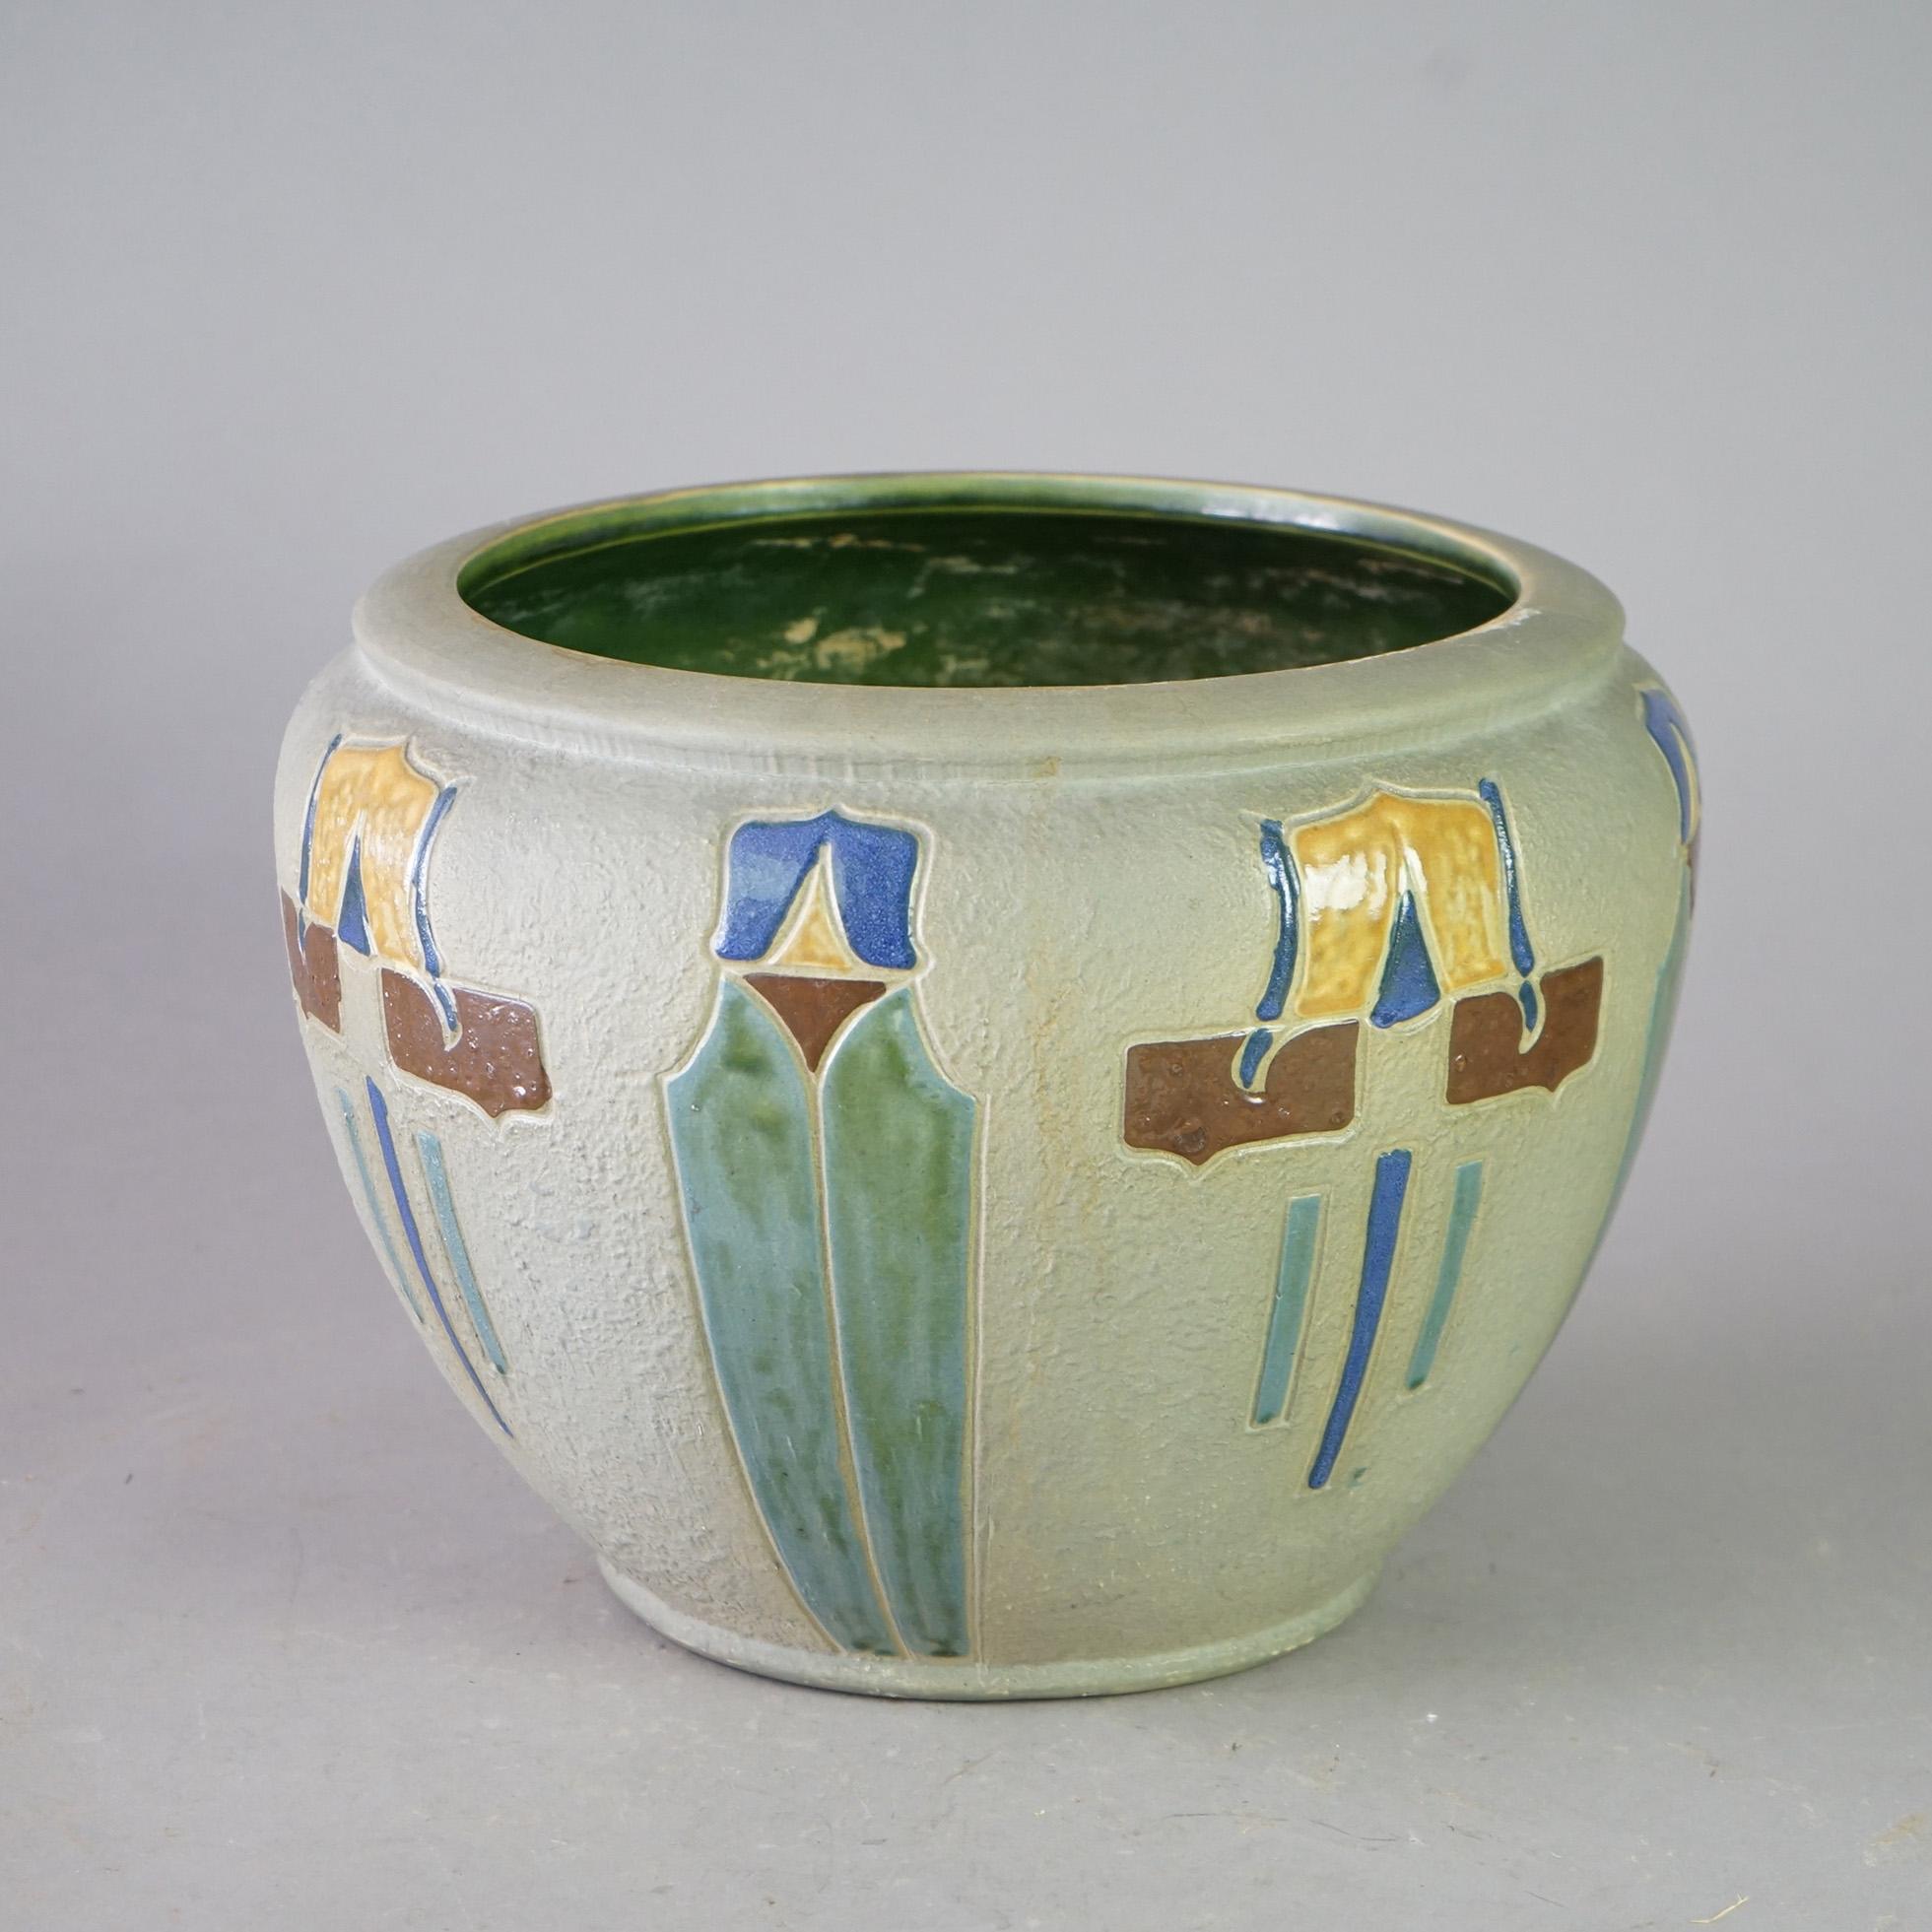 Antike Arts and Crafts Roseville Mostique Art Pottery Jardiniere Circa 1920 im Zustand „Gut“ im Angebot in Big Flats, NY